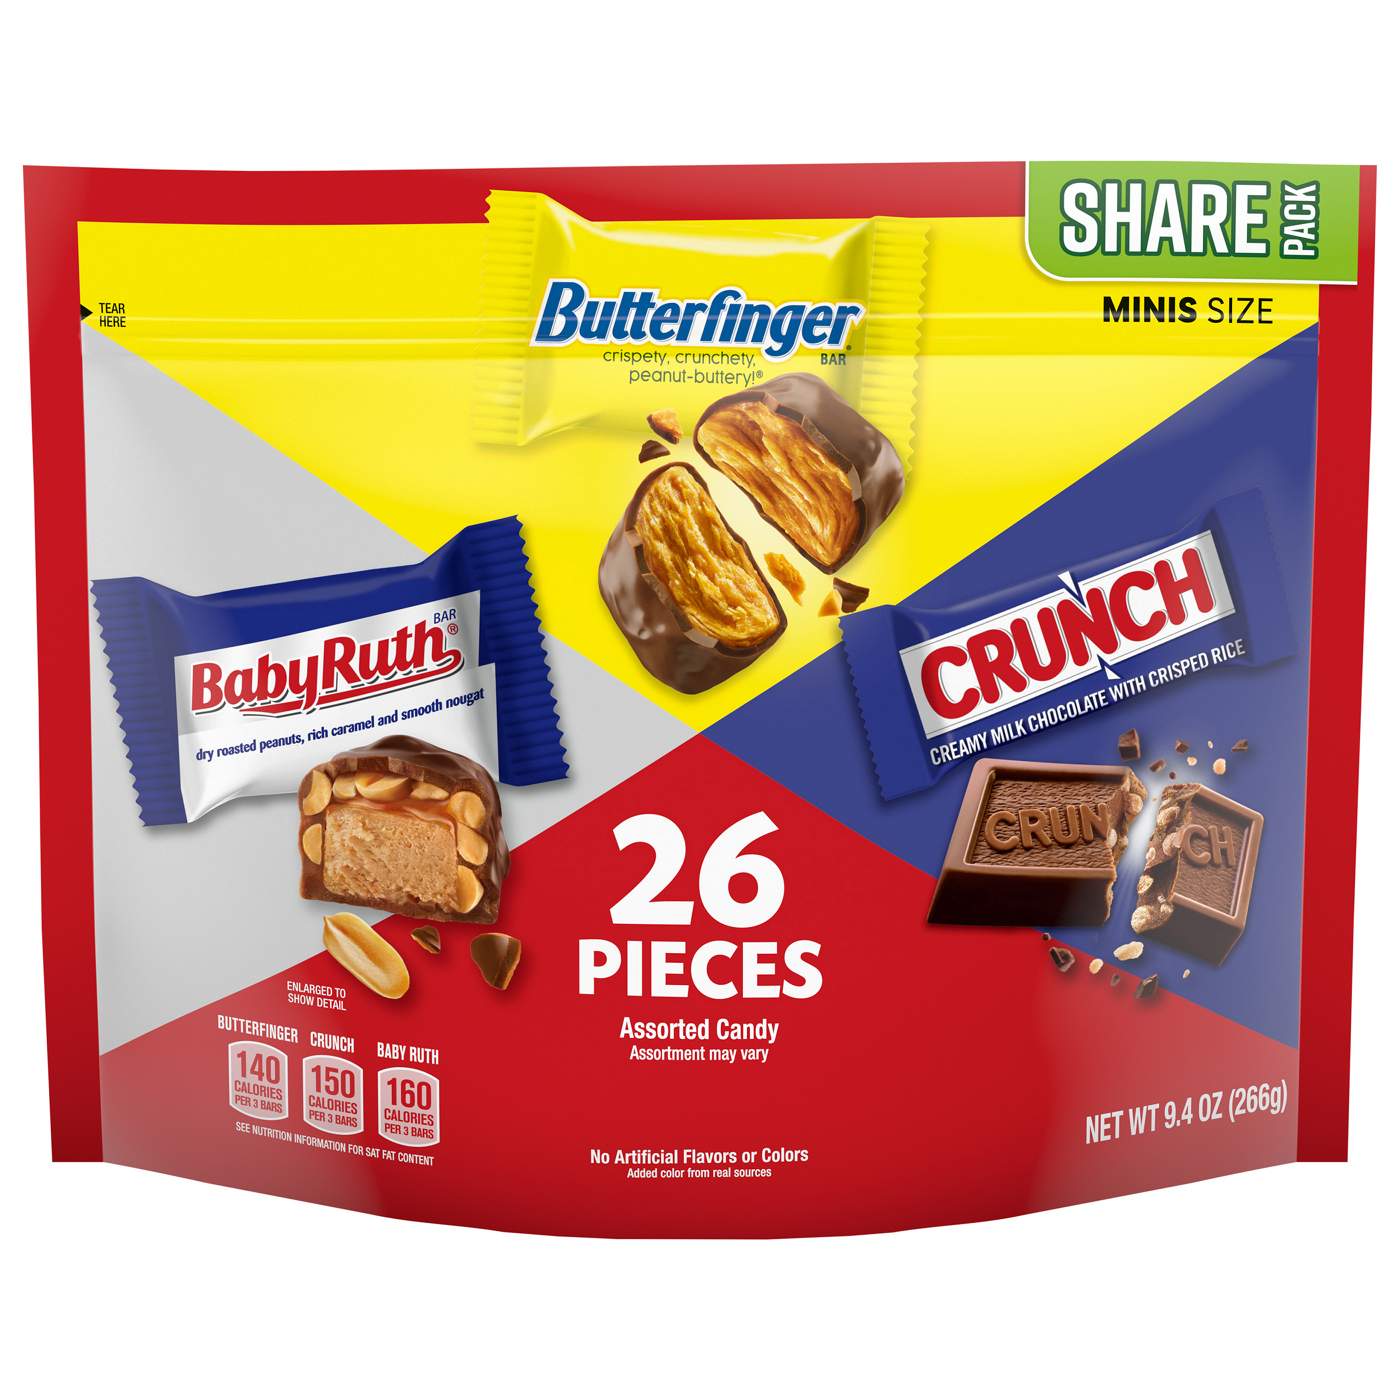 Butterfinger, Baby Ruth & Crunch Minis Assorted Chocolate Candy Bars - Share Pack; image 1 of 2